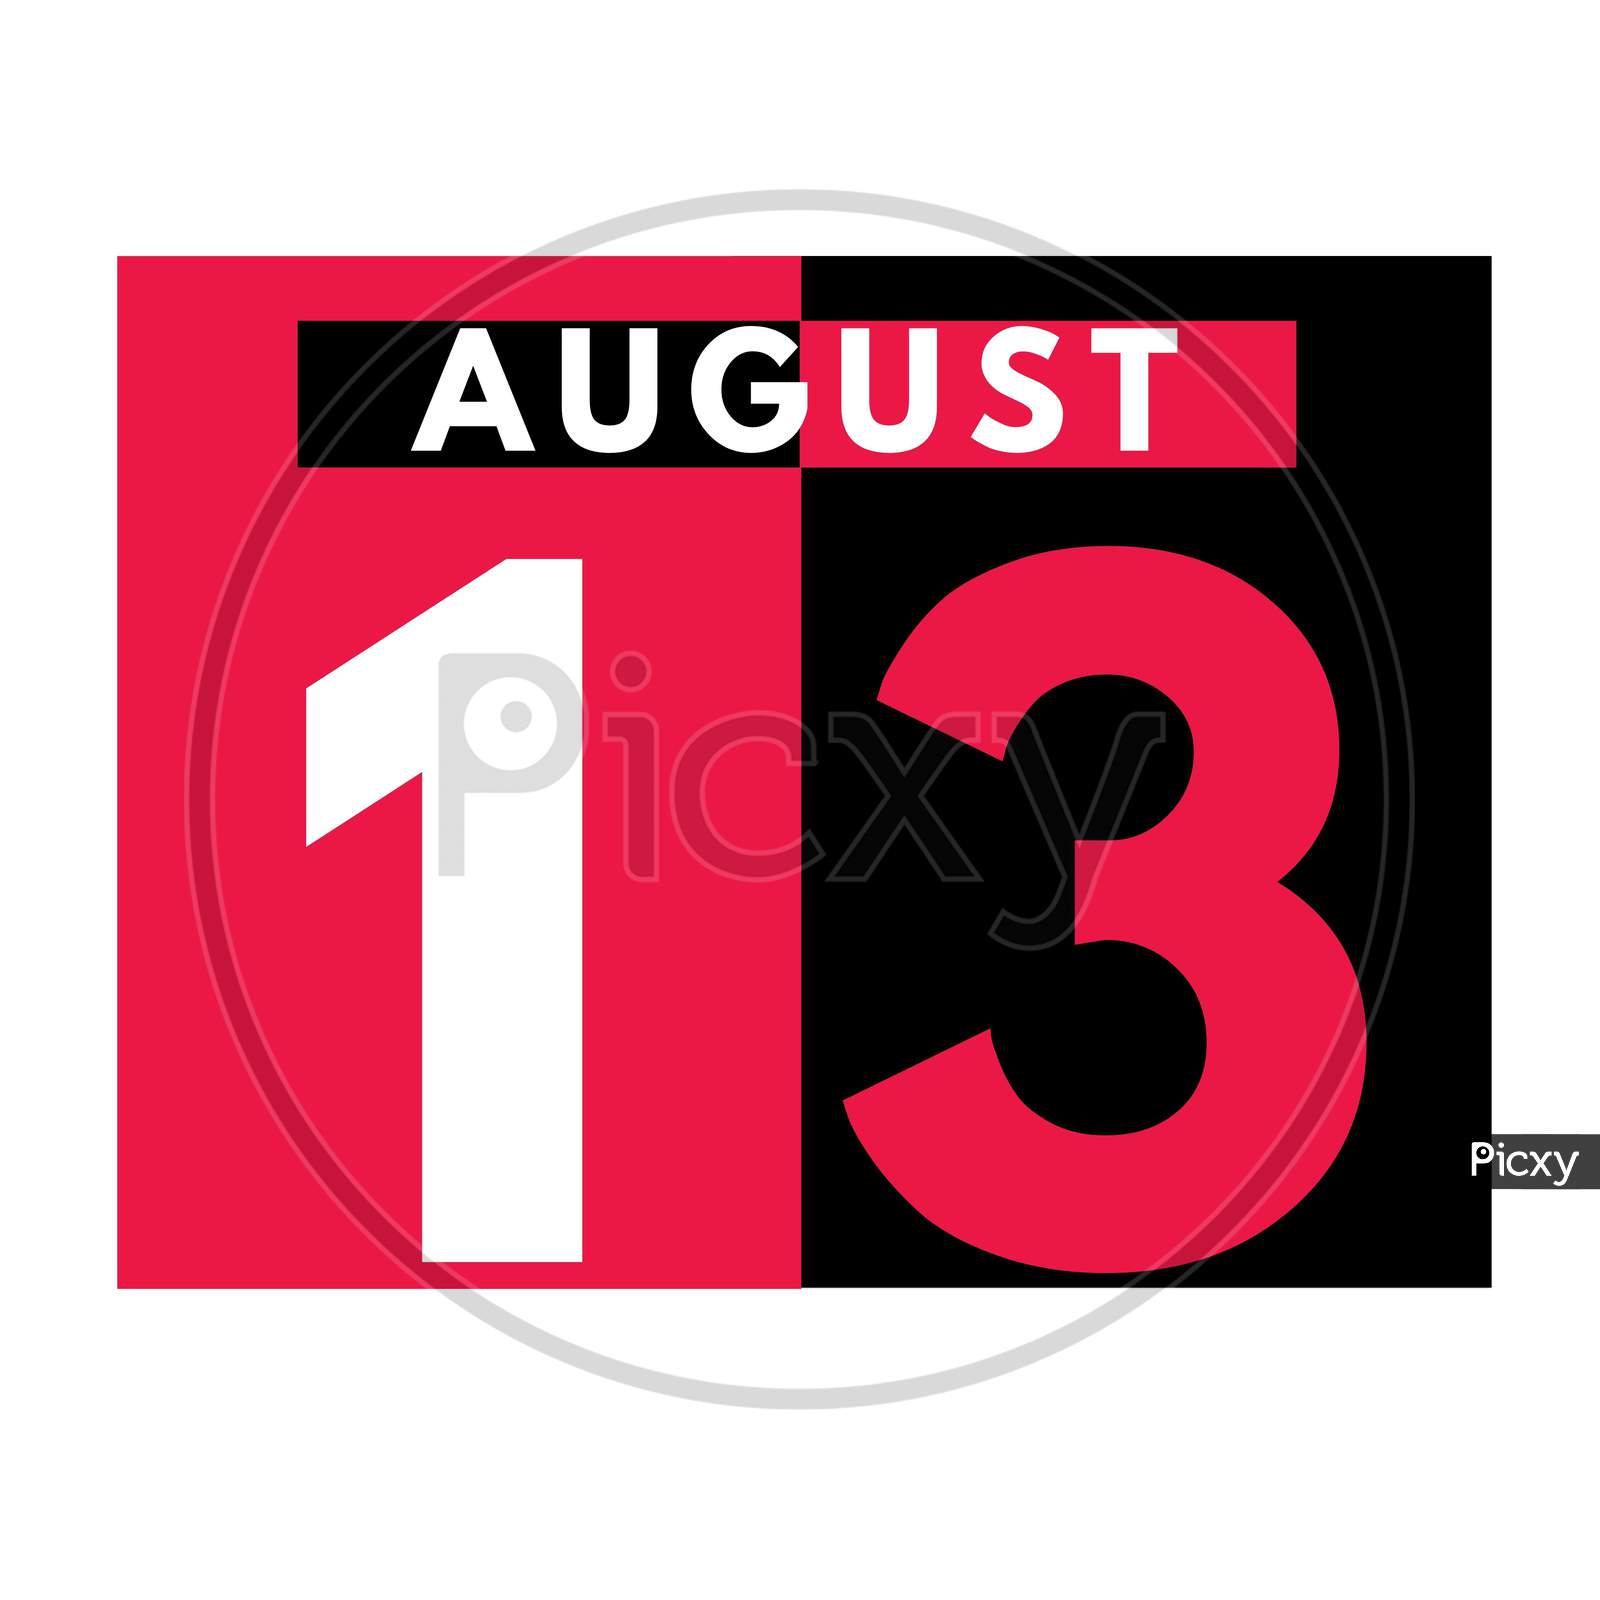 August 13 . Modern Daily Calendar Icon .Date ,Day, Month .Calendar For The Month Of August